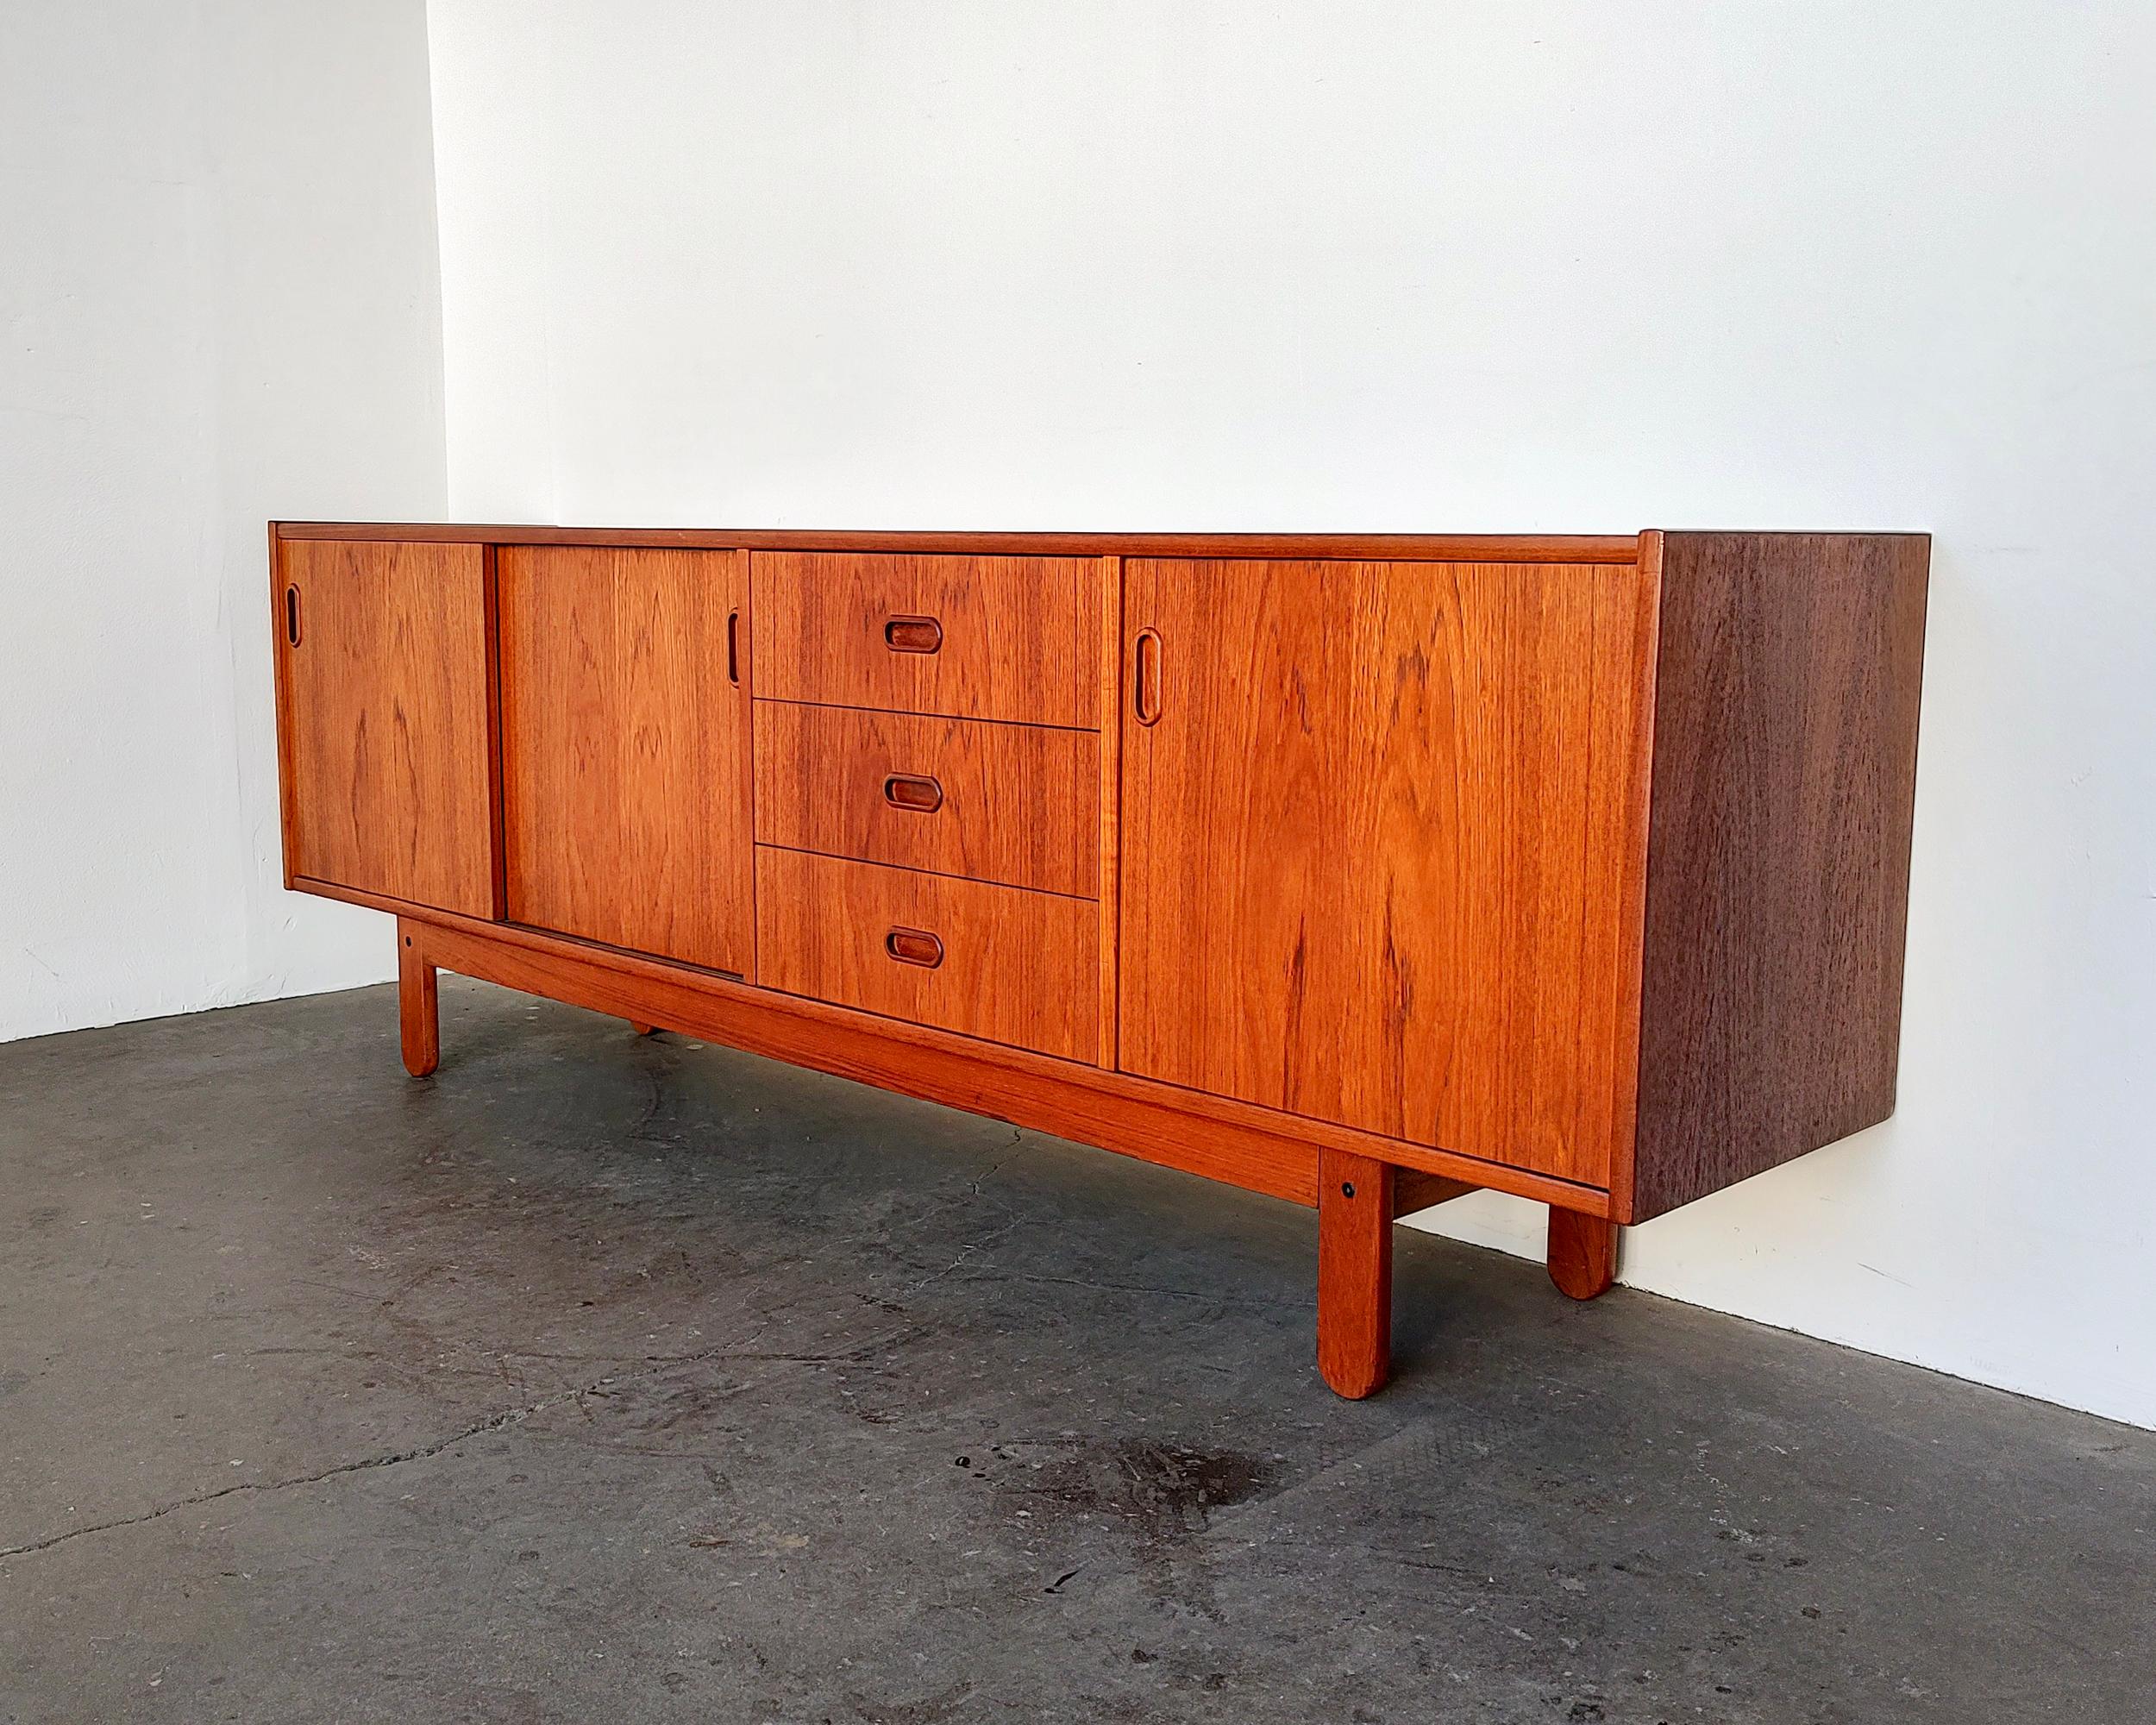 Beautiful Danish modern teak wood credenza by Bramin Møbler circa 1960s. Sliding doors on the left open to an adjustable shelf, three drawers with dovetail joinery and one opening cabinet door on the right. Overall excellent condition, some very